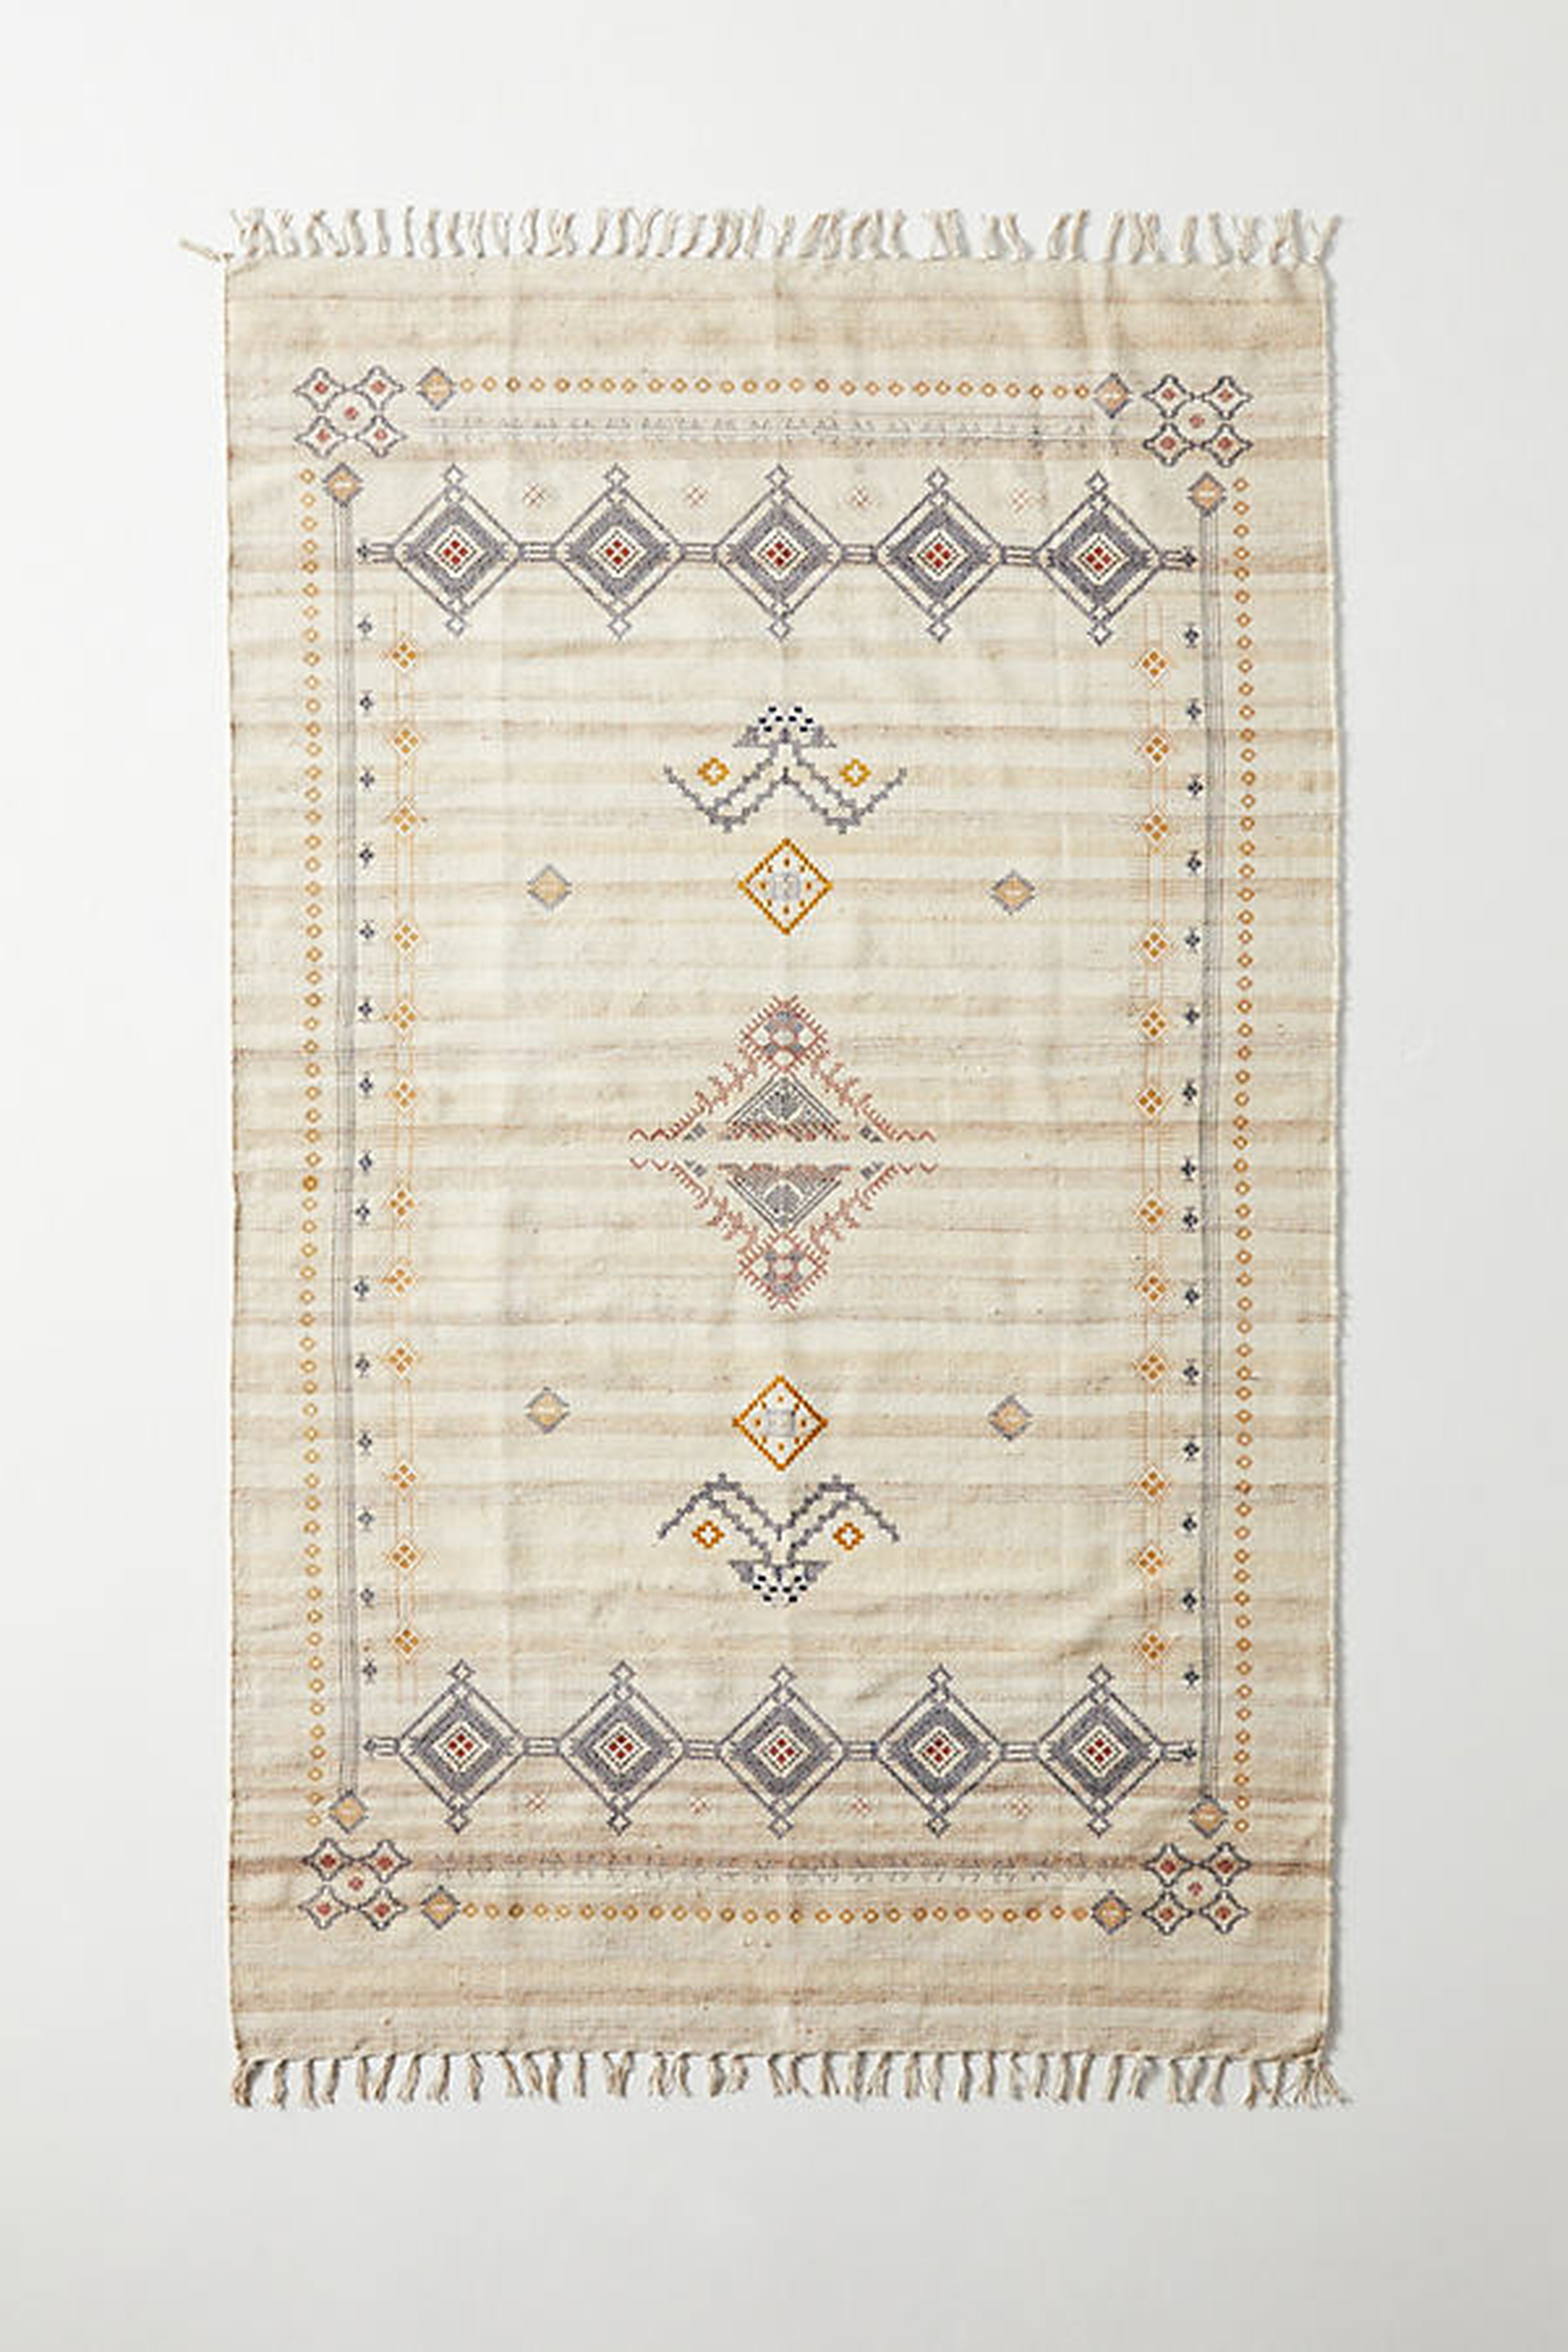 Handwoven Nalani Rug By Anthropologie in Beige Size 5X8 - Anthropologie